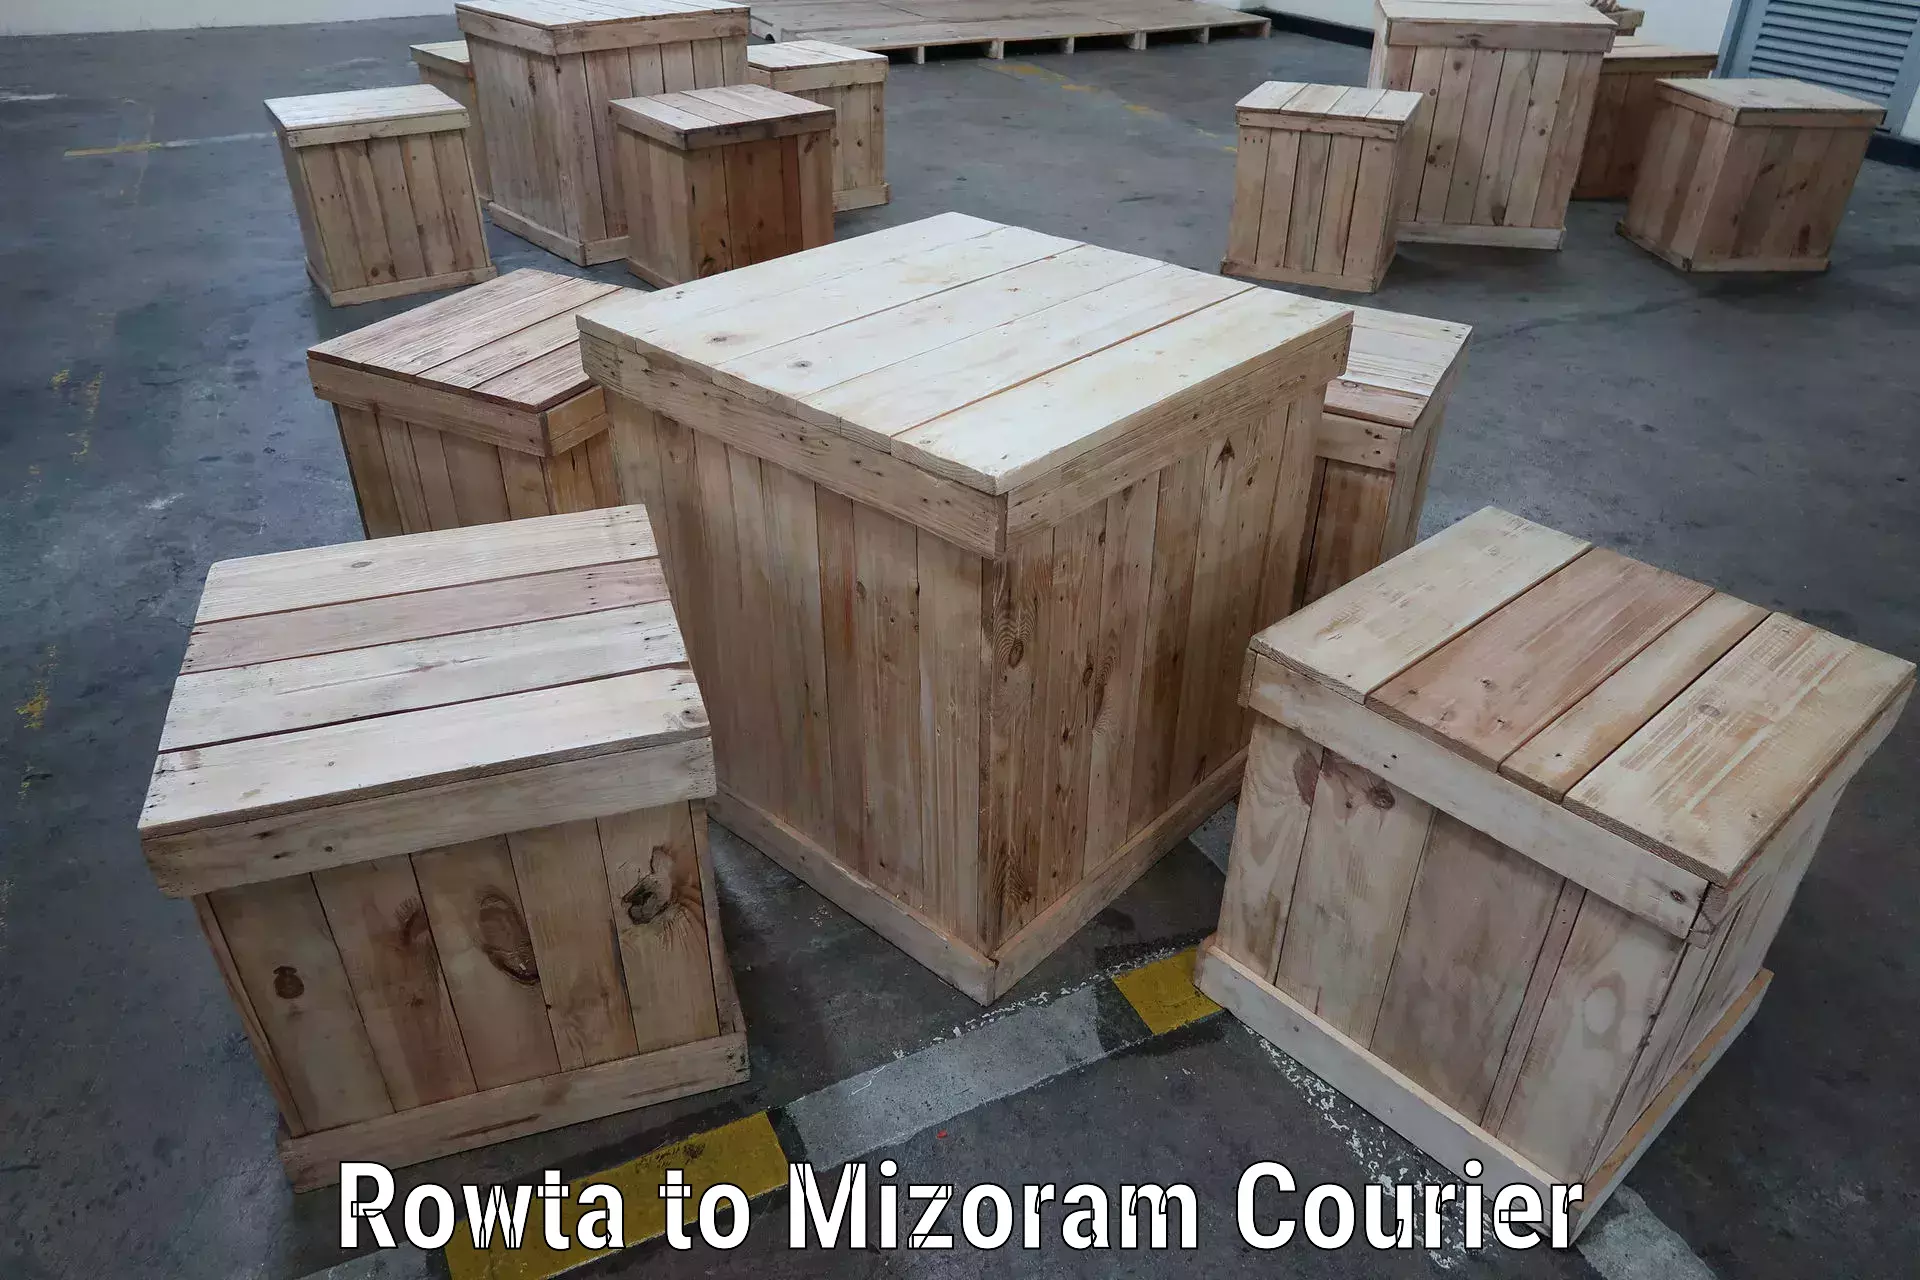 Automated parcel services Rowta to Mizoram